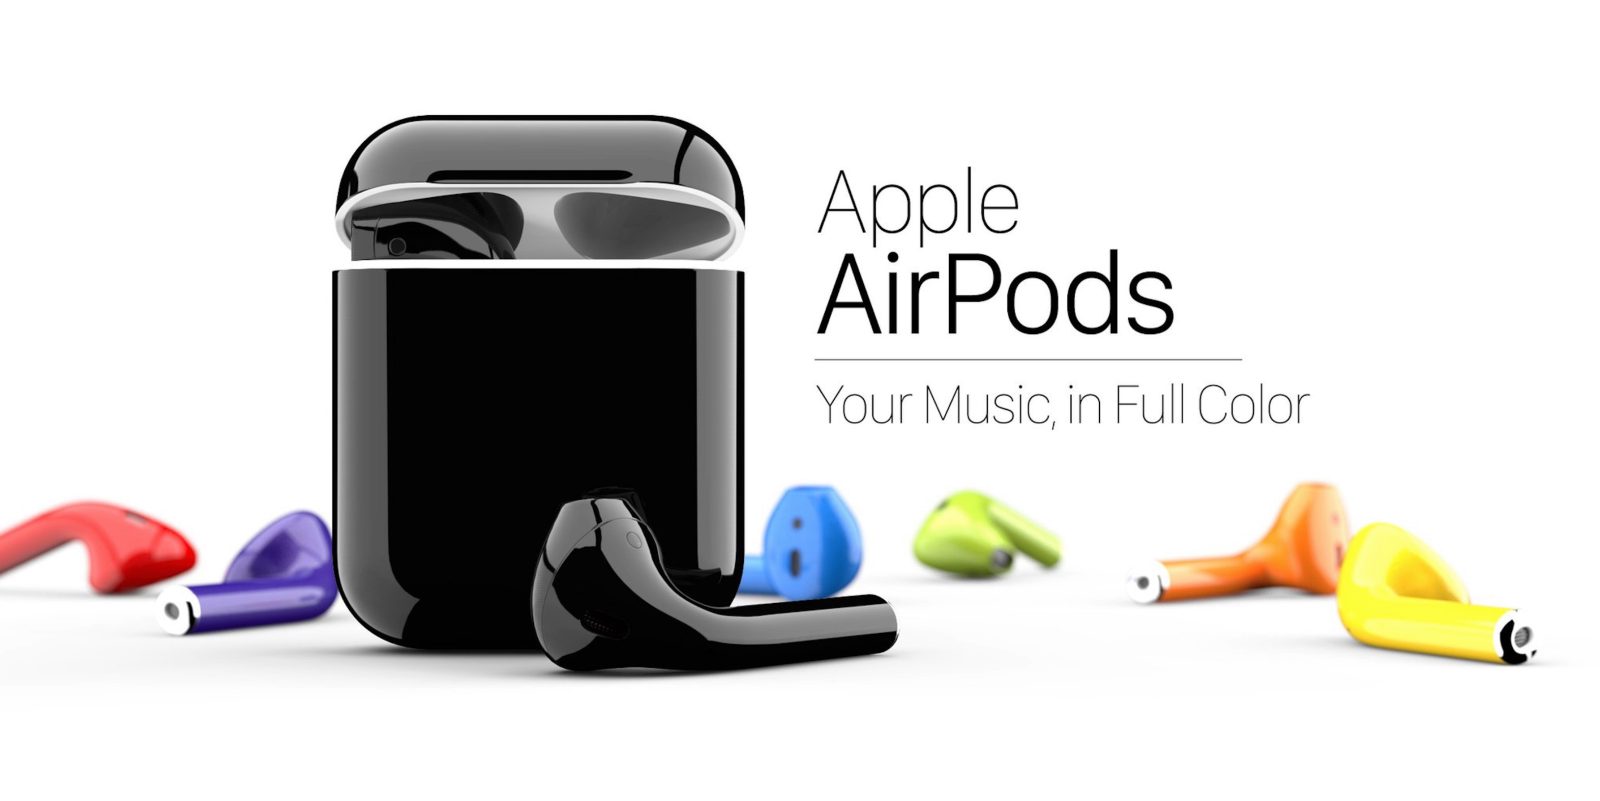 ColorWare Introduces Ability To Customize AirPods In 58 Different Colors